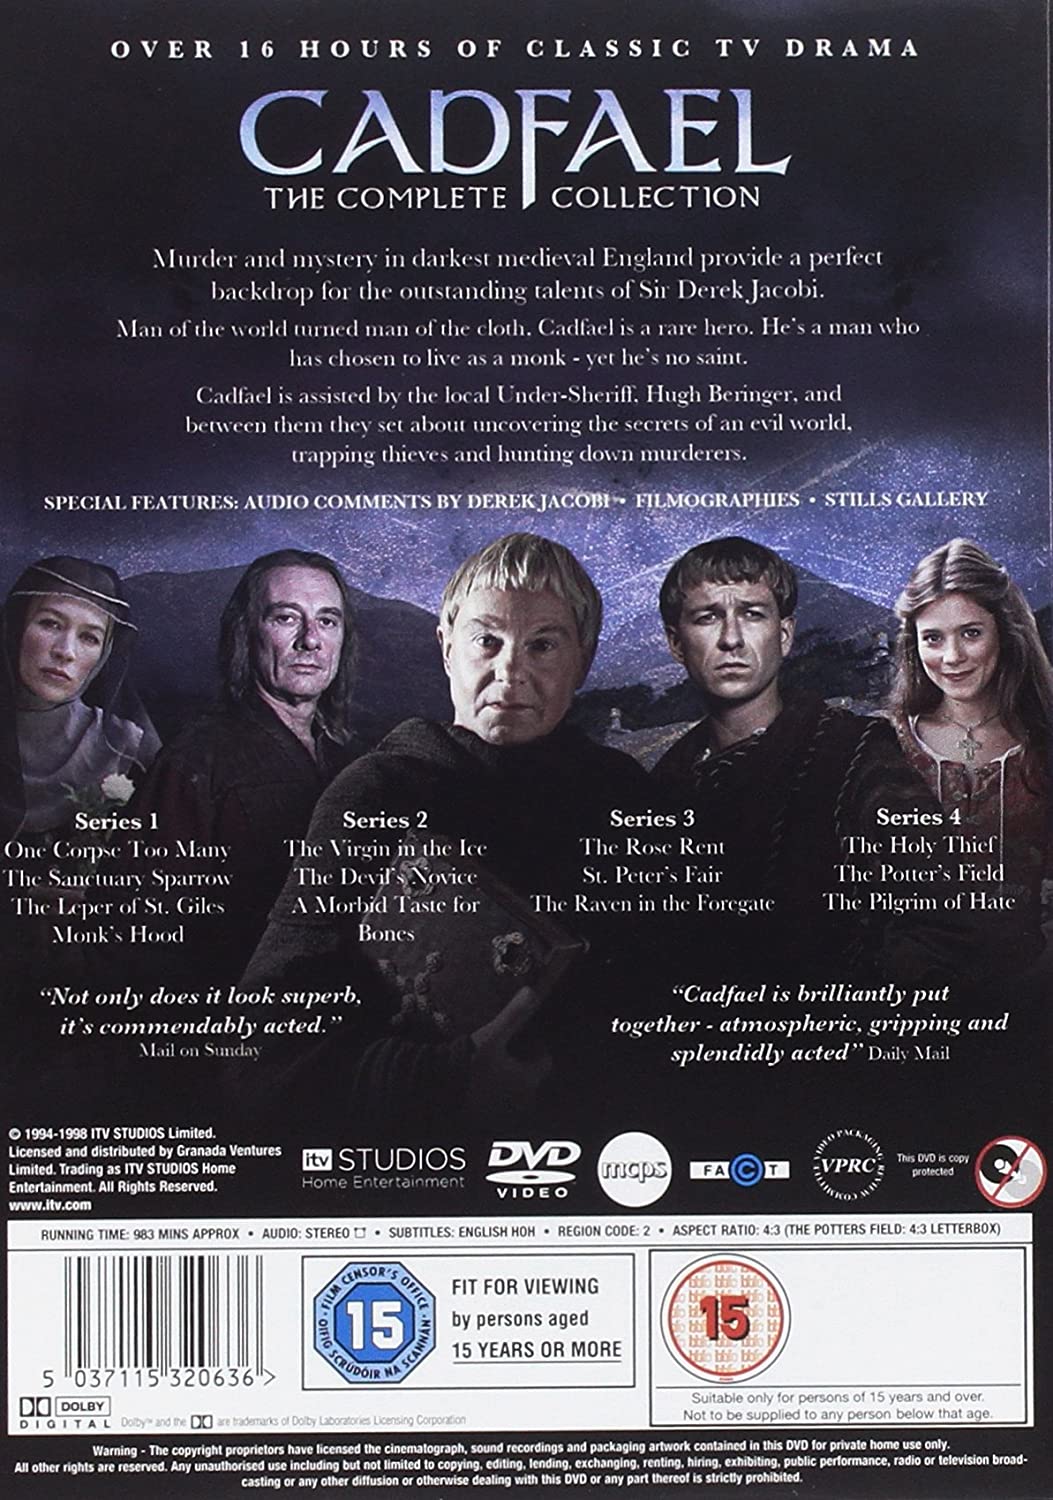 Cadfael - The Complete Collection - Drama [DVD]